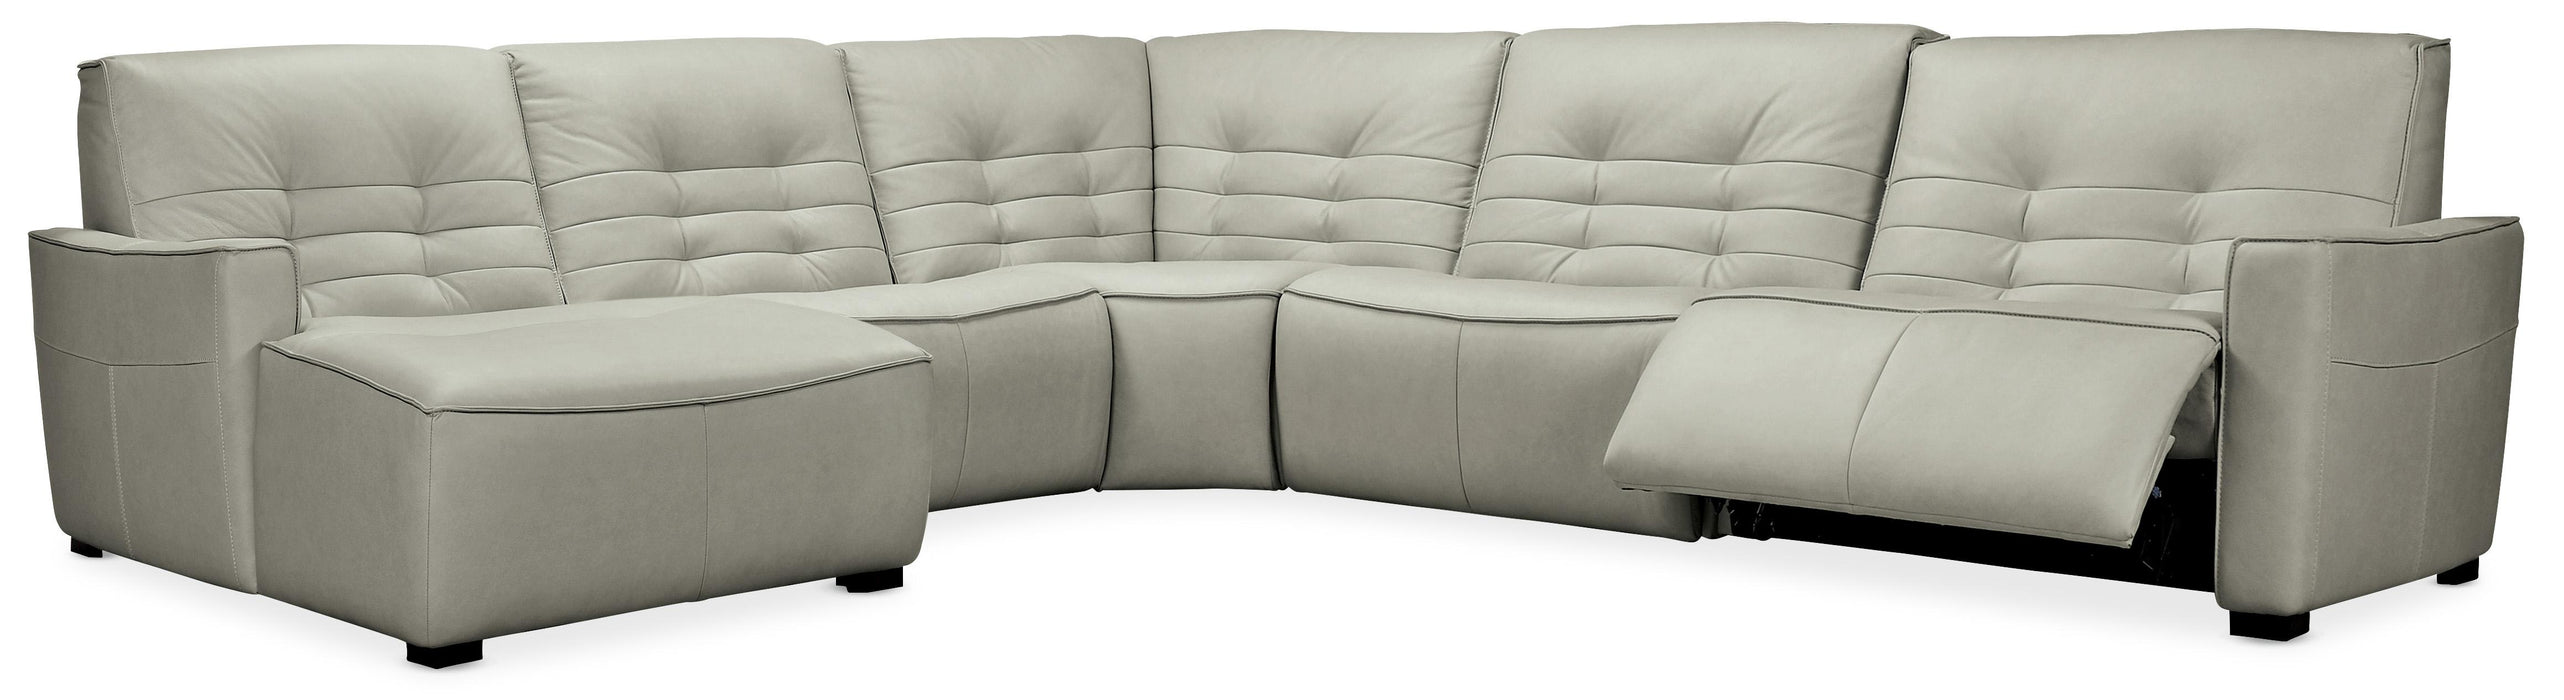 Reaux 5-Piece LAF Chaise Sectional w/2 Power Recliners image